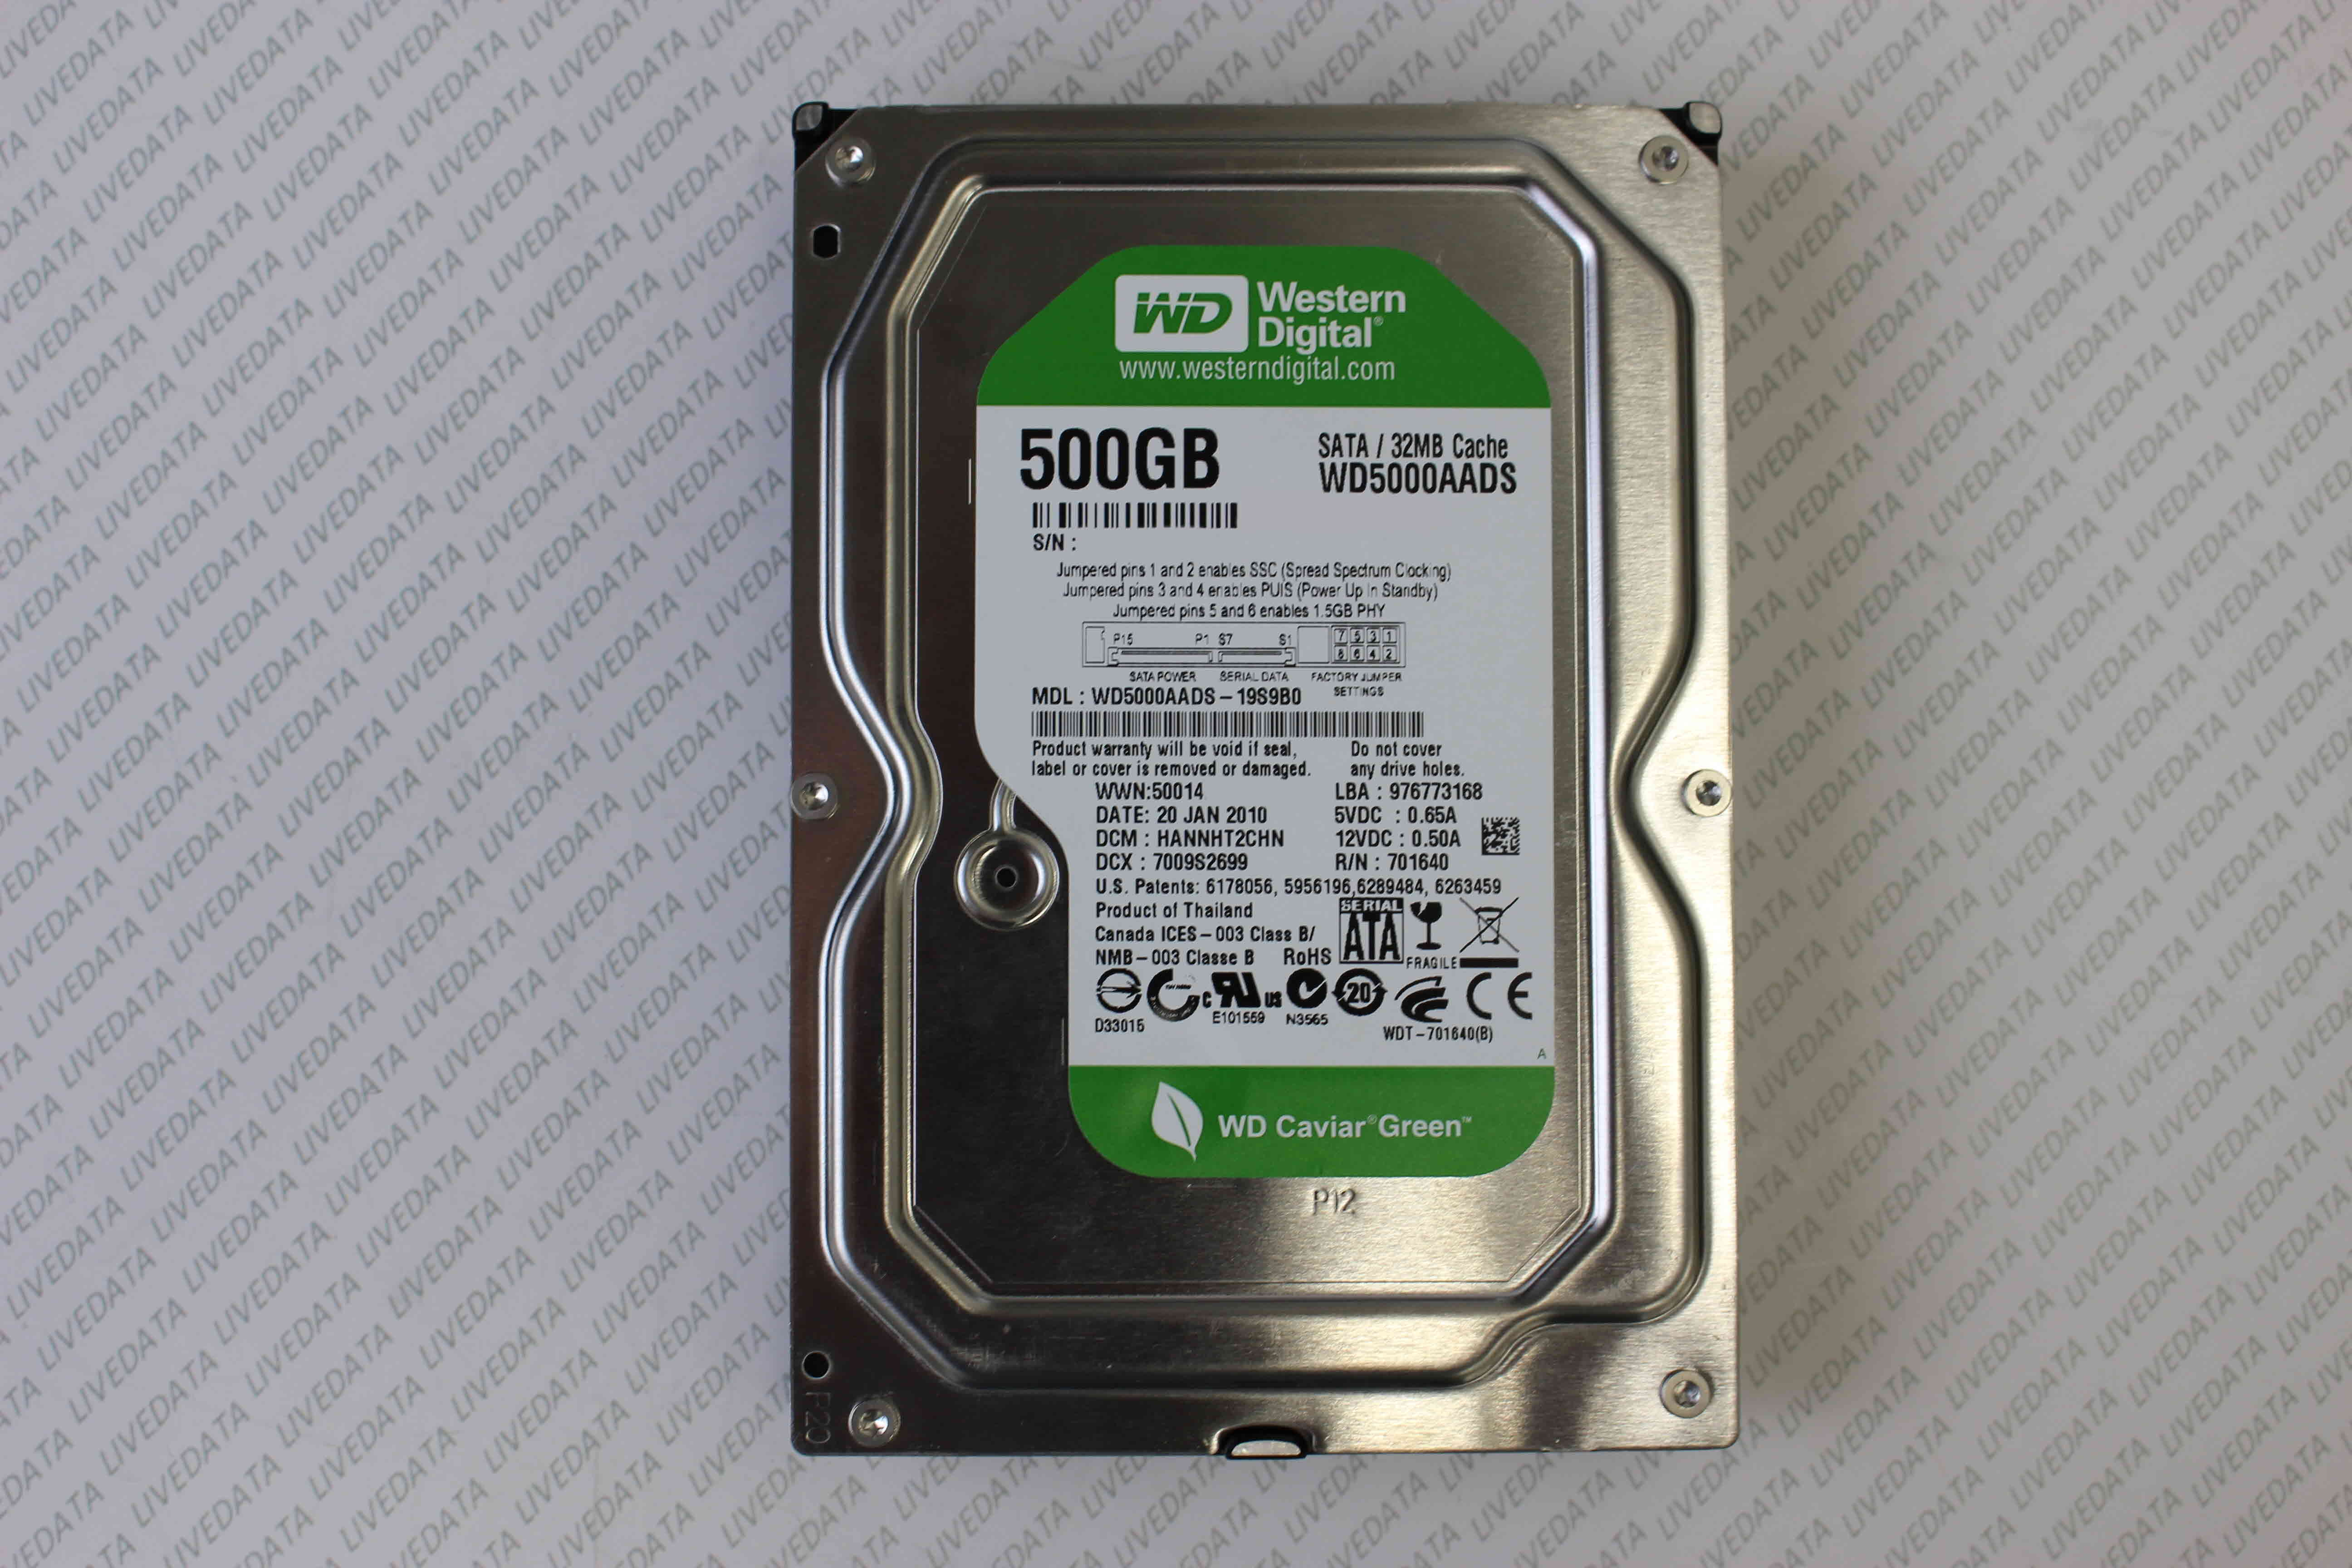 wd5000aads-1969b0-recovery